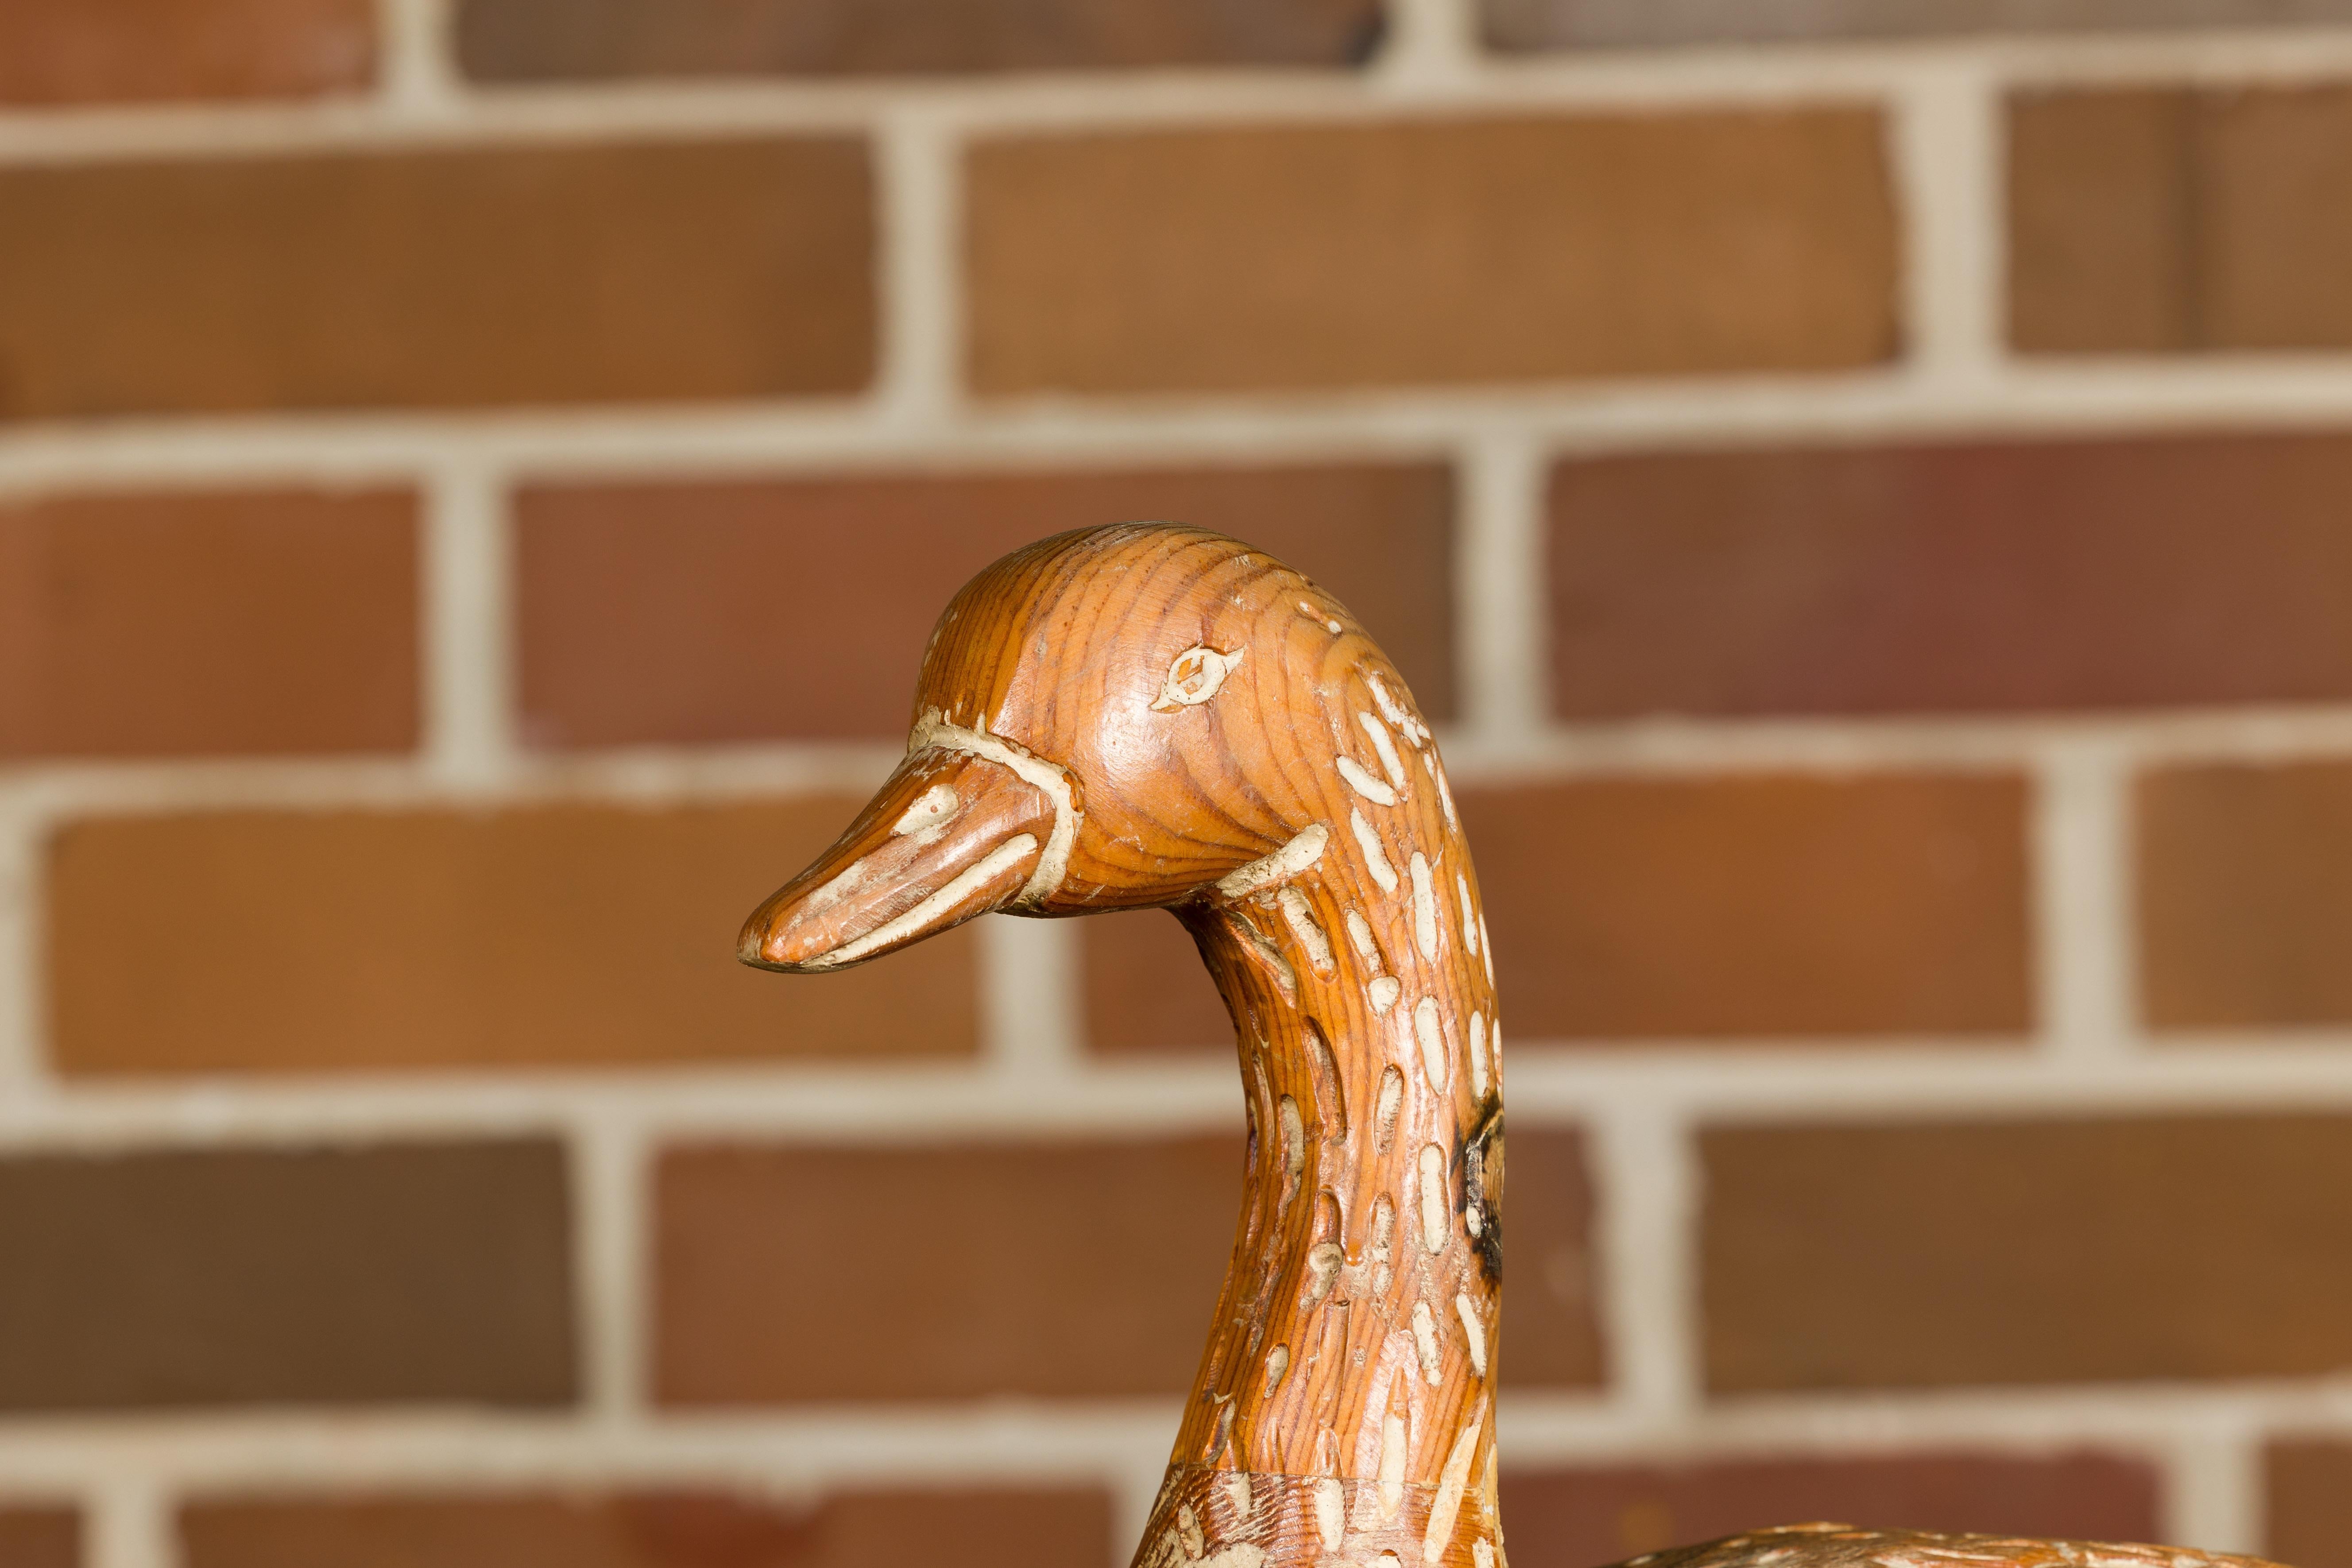 Italian 1920s Carved Wooden Duck Sculpture with Painted Accents For Sale 3